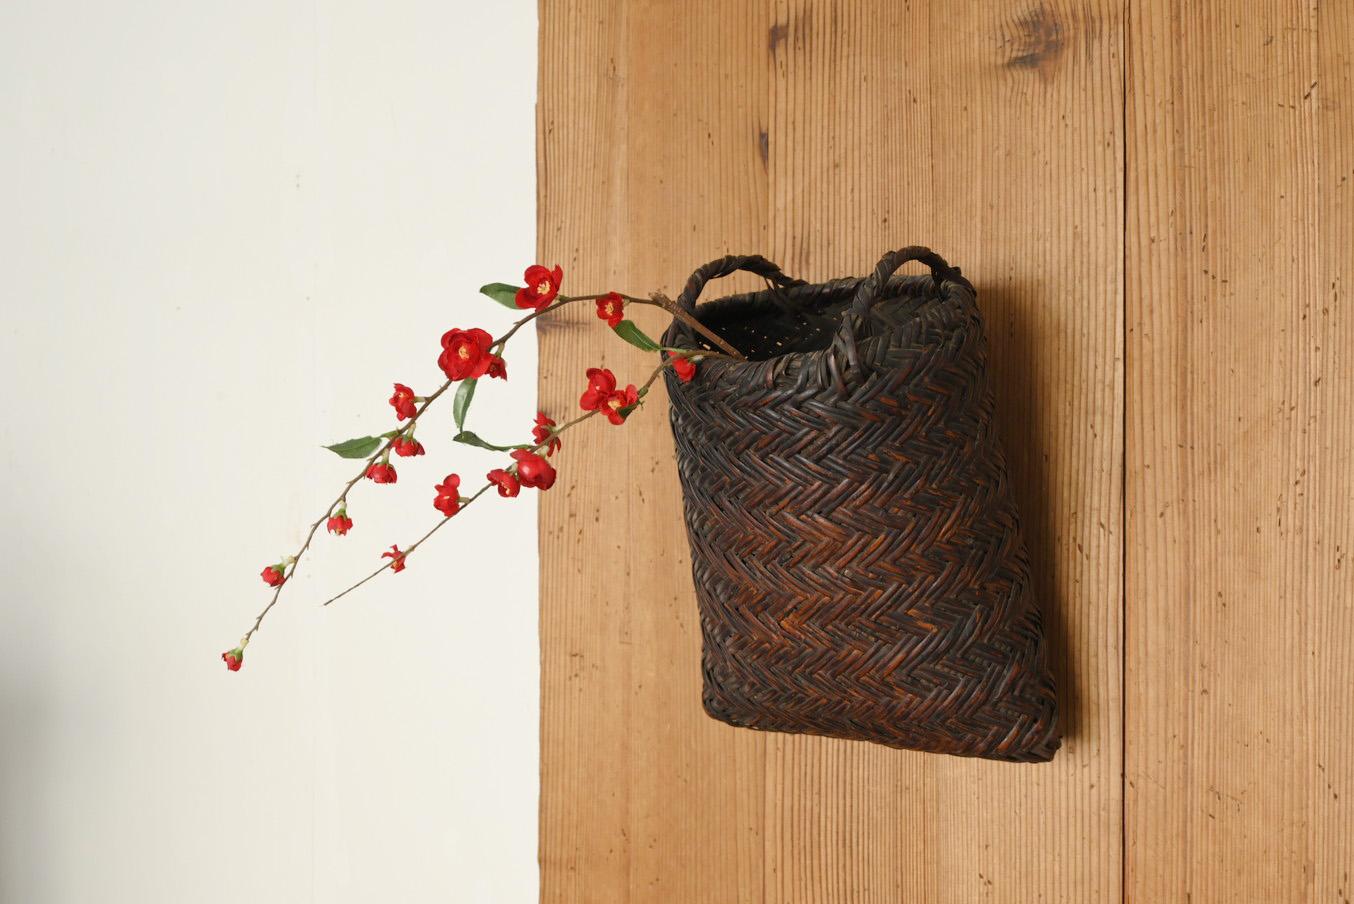 This is a woven bamboo basket made in Japan from the Meiji to Taisho periods (1868-1920).
I don't know if the baskets actually used by farmers were repurposed as flower vases, or if they were originally made for arranging flowers, but it is a design